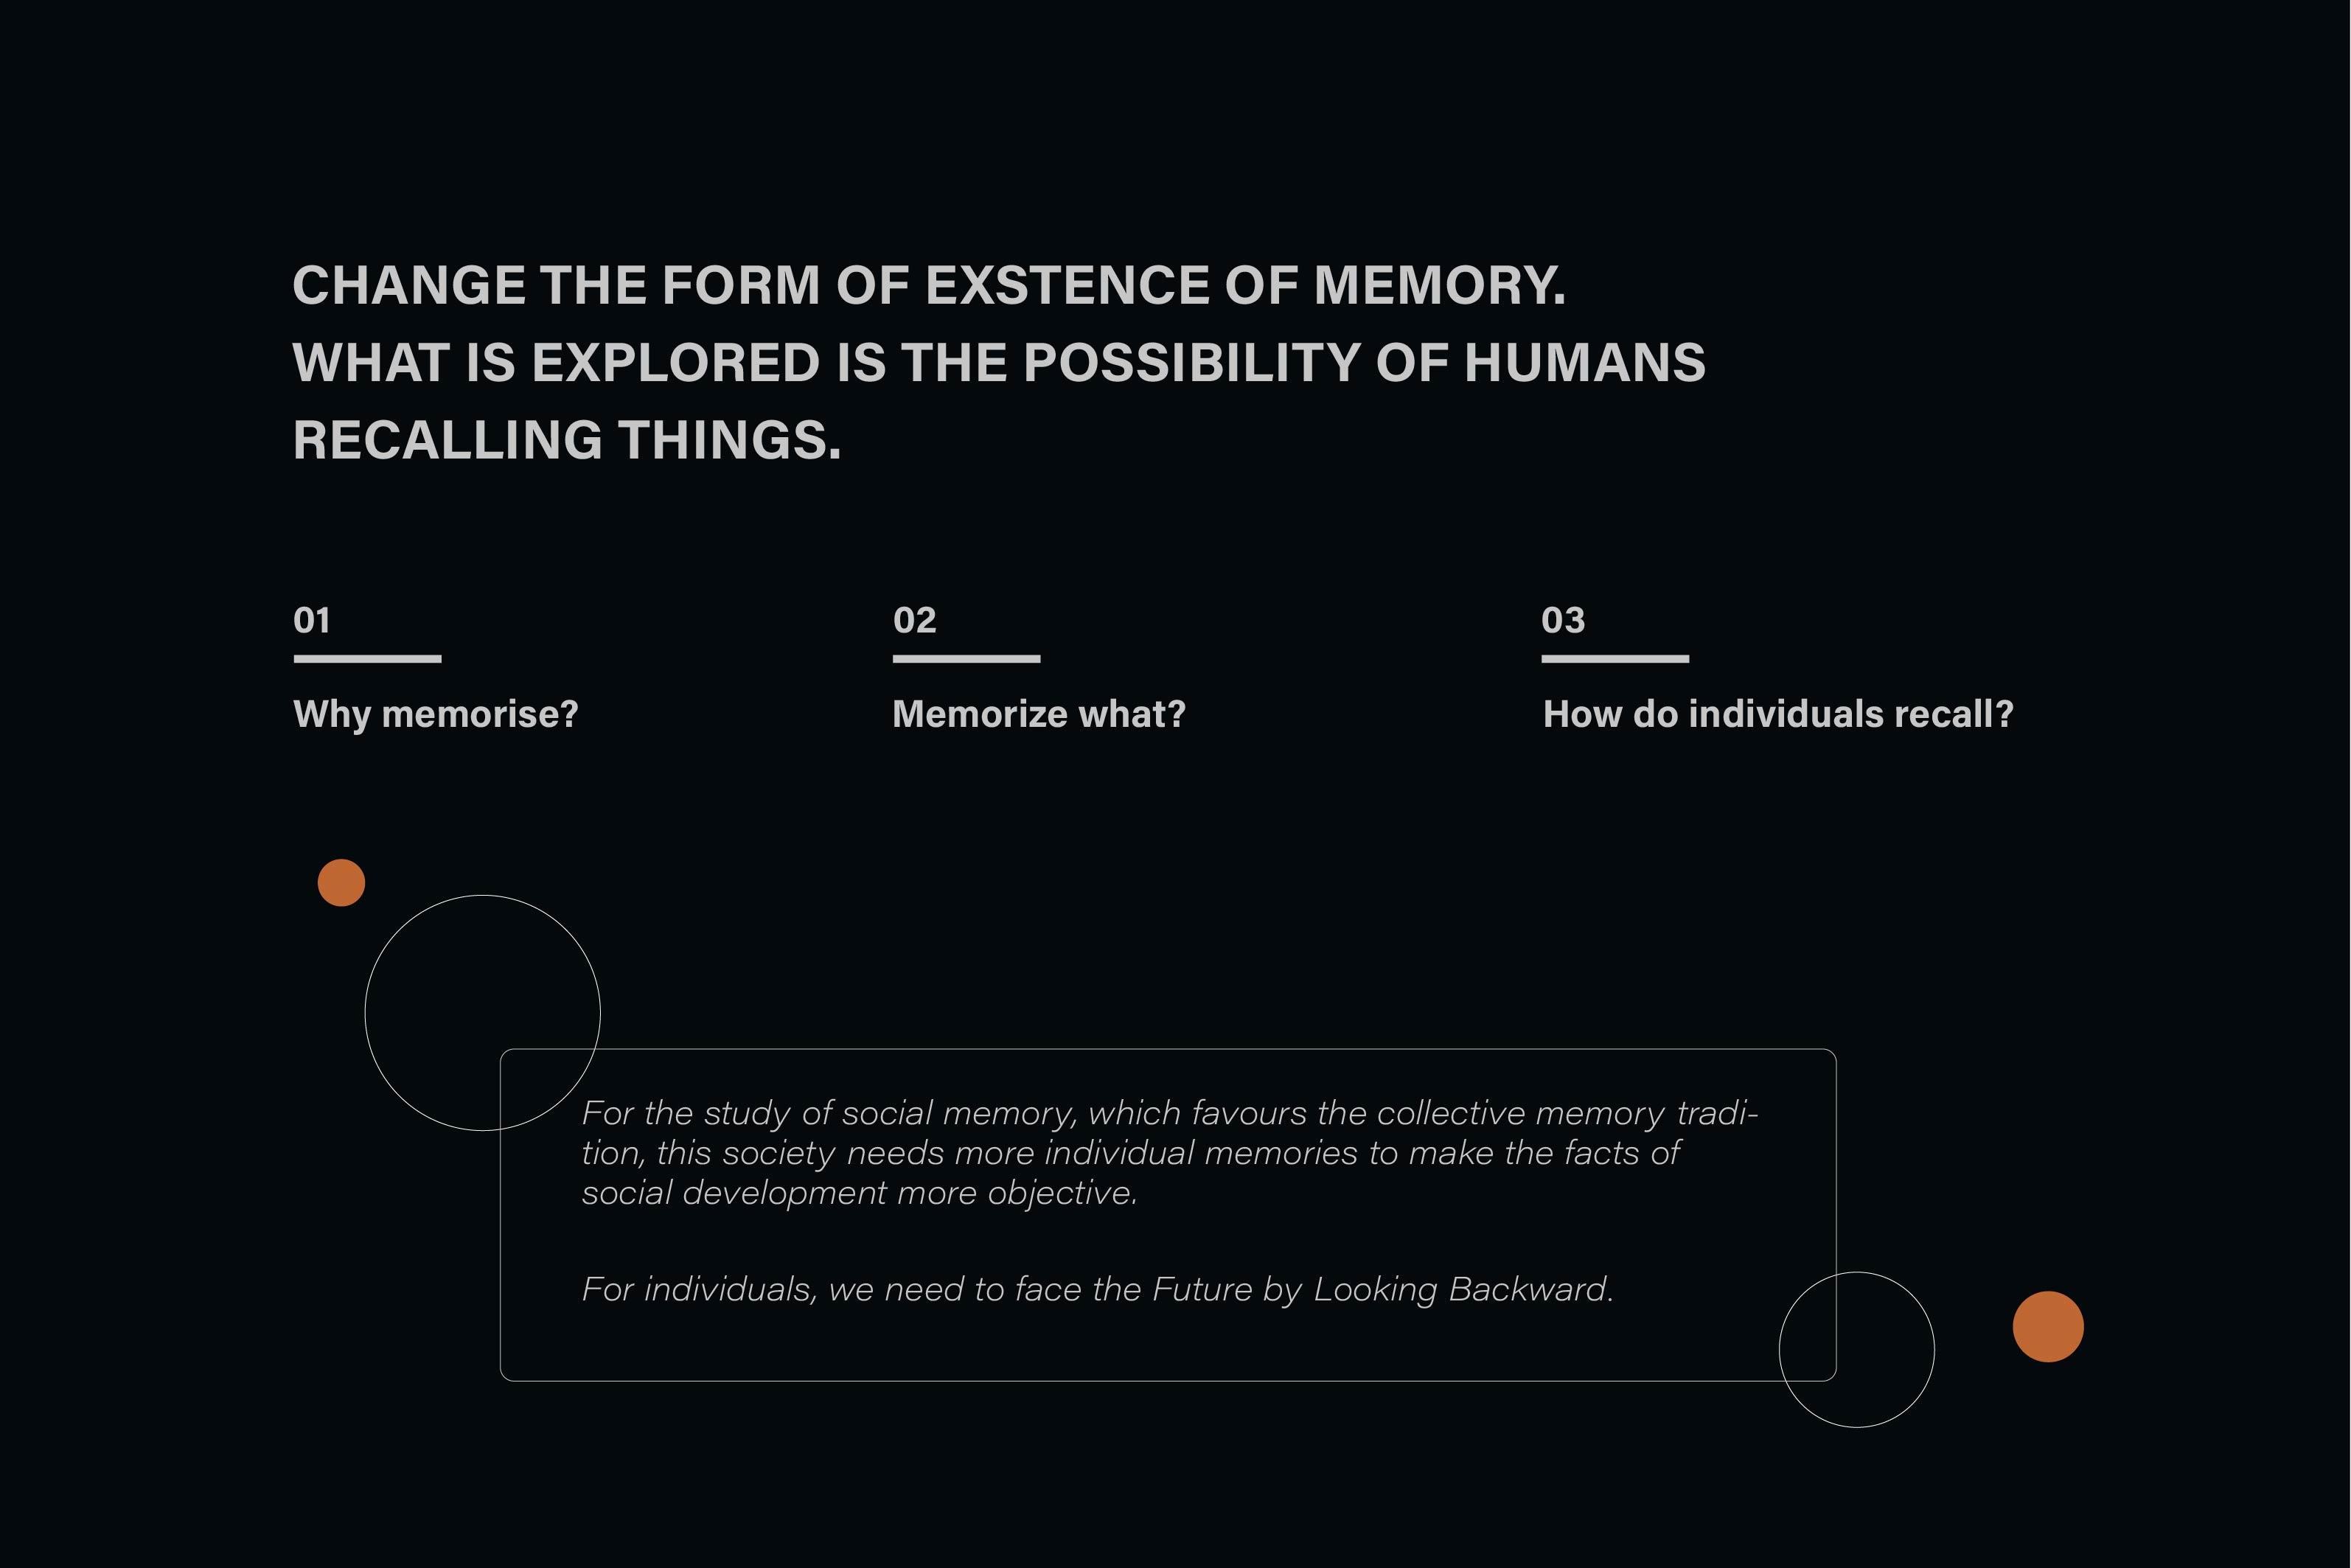 Design for human memory - A multi-sensory exploration of the possibilities of human recall